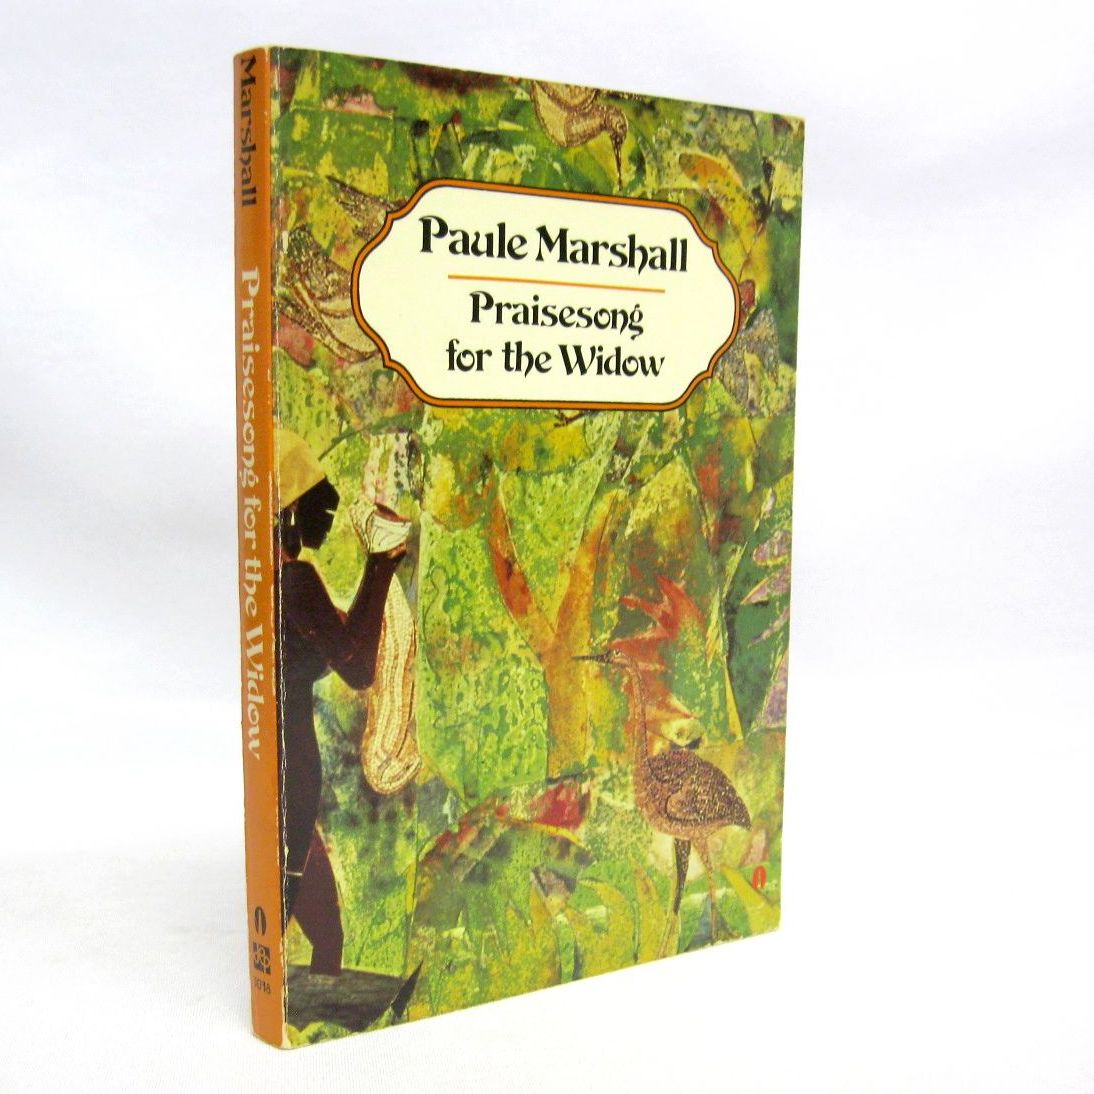 Praisesong for the Widow by Paule Marshall